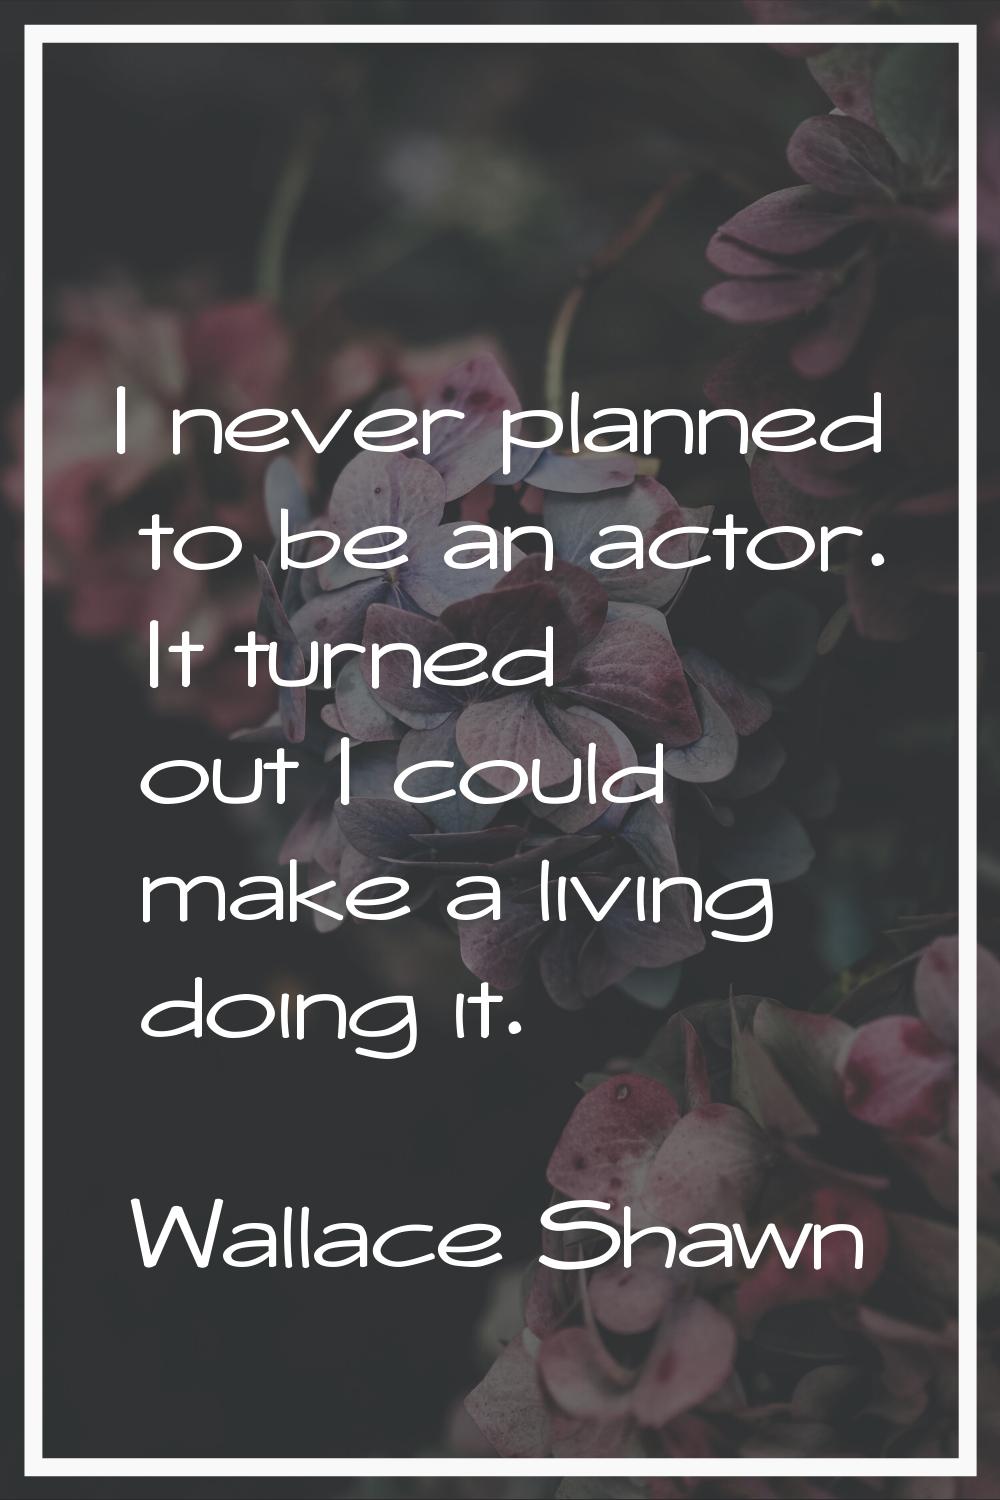 I never planned to be an actor. It turned out I could make a living doing it.